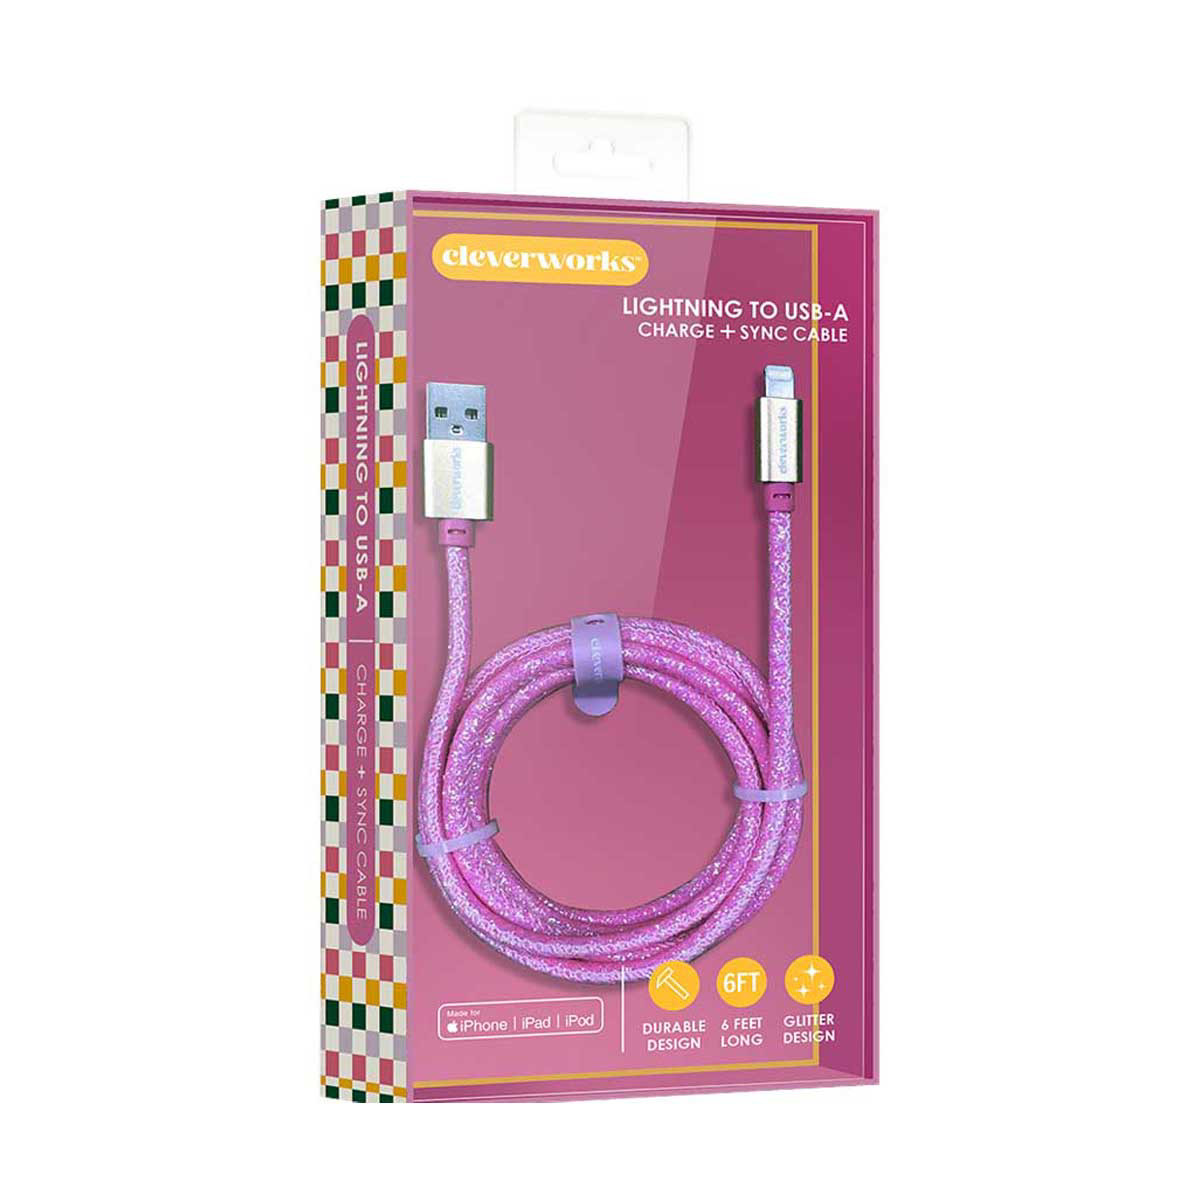 Cleverworks Lightning to USB-A Cable, 6 ft